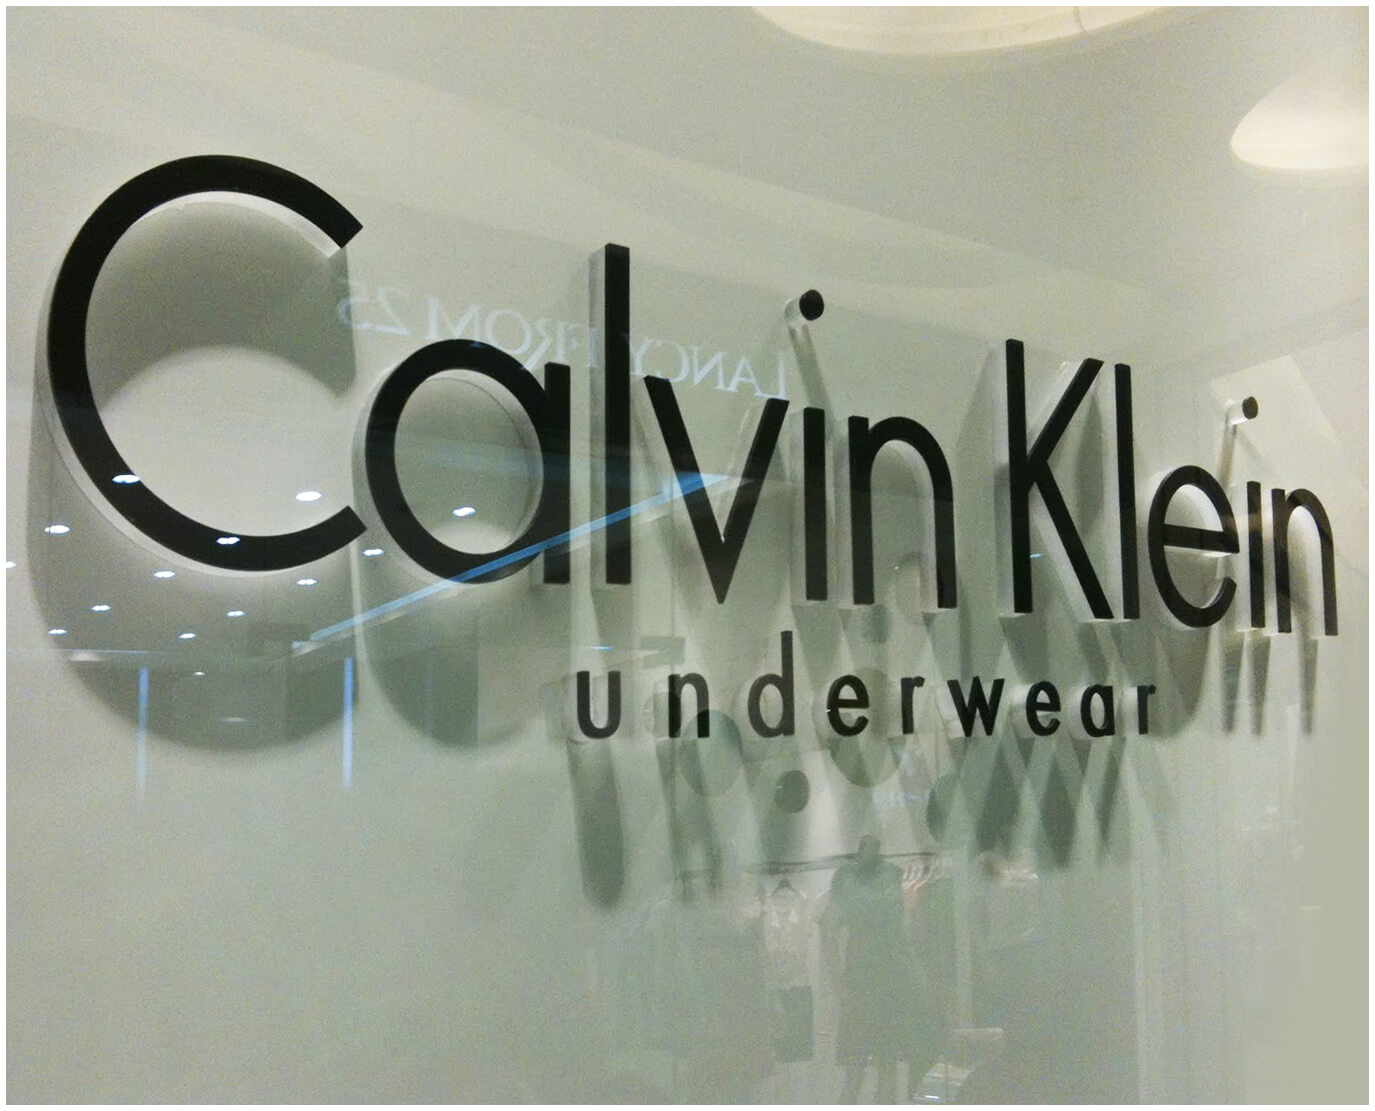 laserforcut acrylic letters for calvin klein